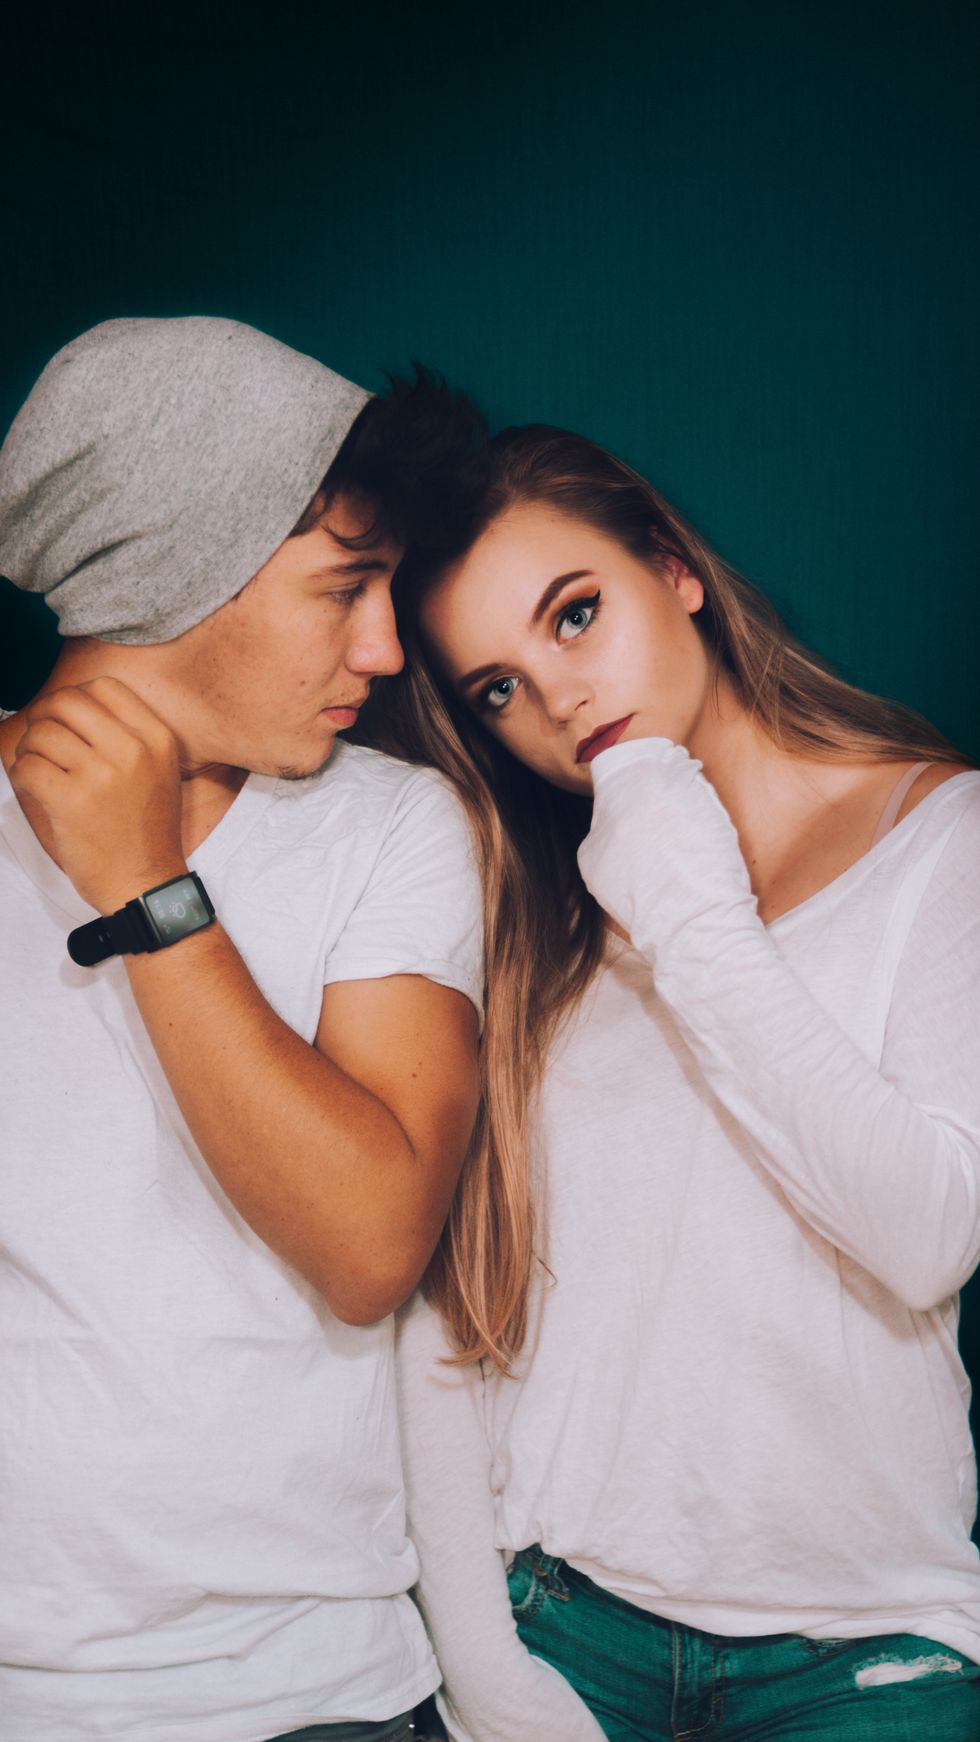 The One Question All 20-Something Girls Should Ask Themselves Before Getting Into A Relationship